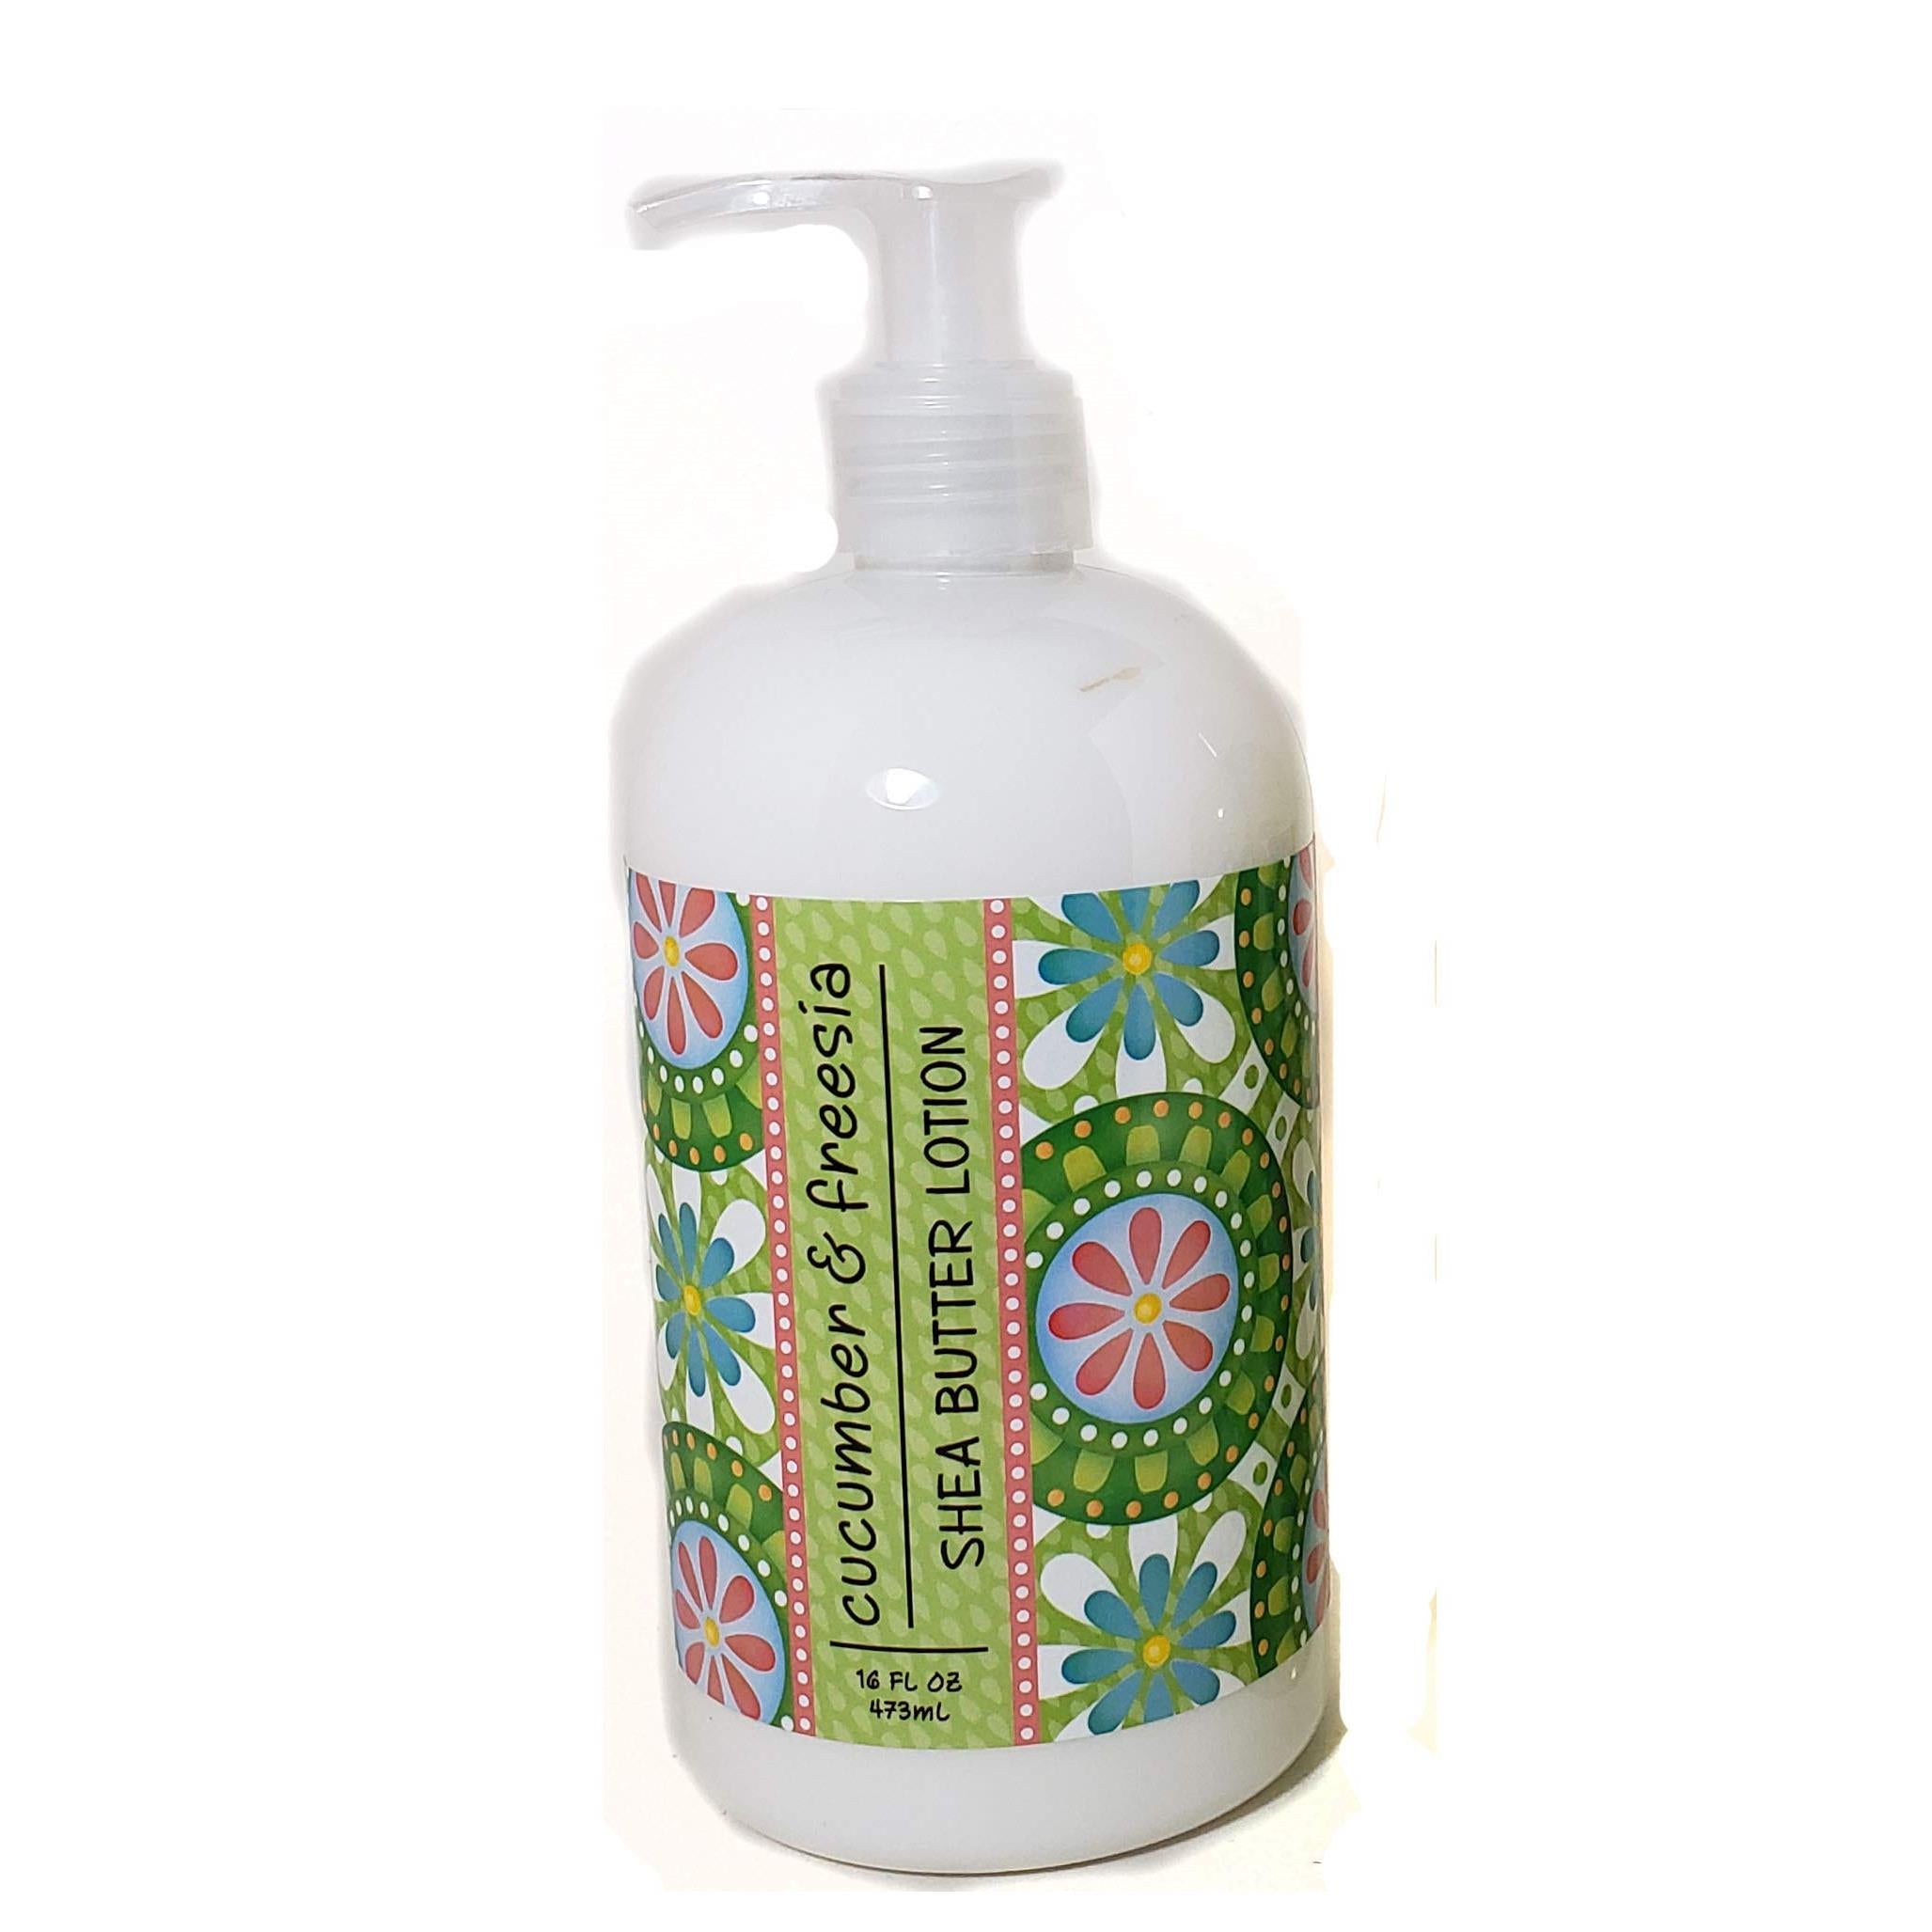 Greenwich Bay Trading Company Garden Collection: Cucumber Freesia (Lotion)